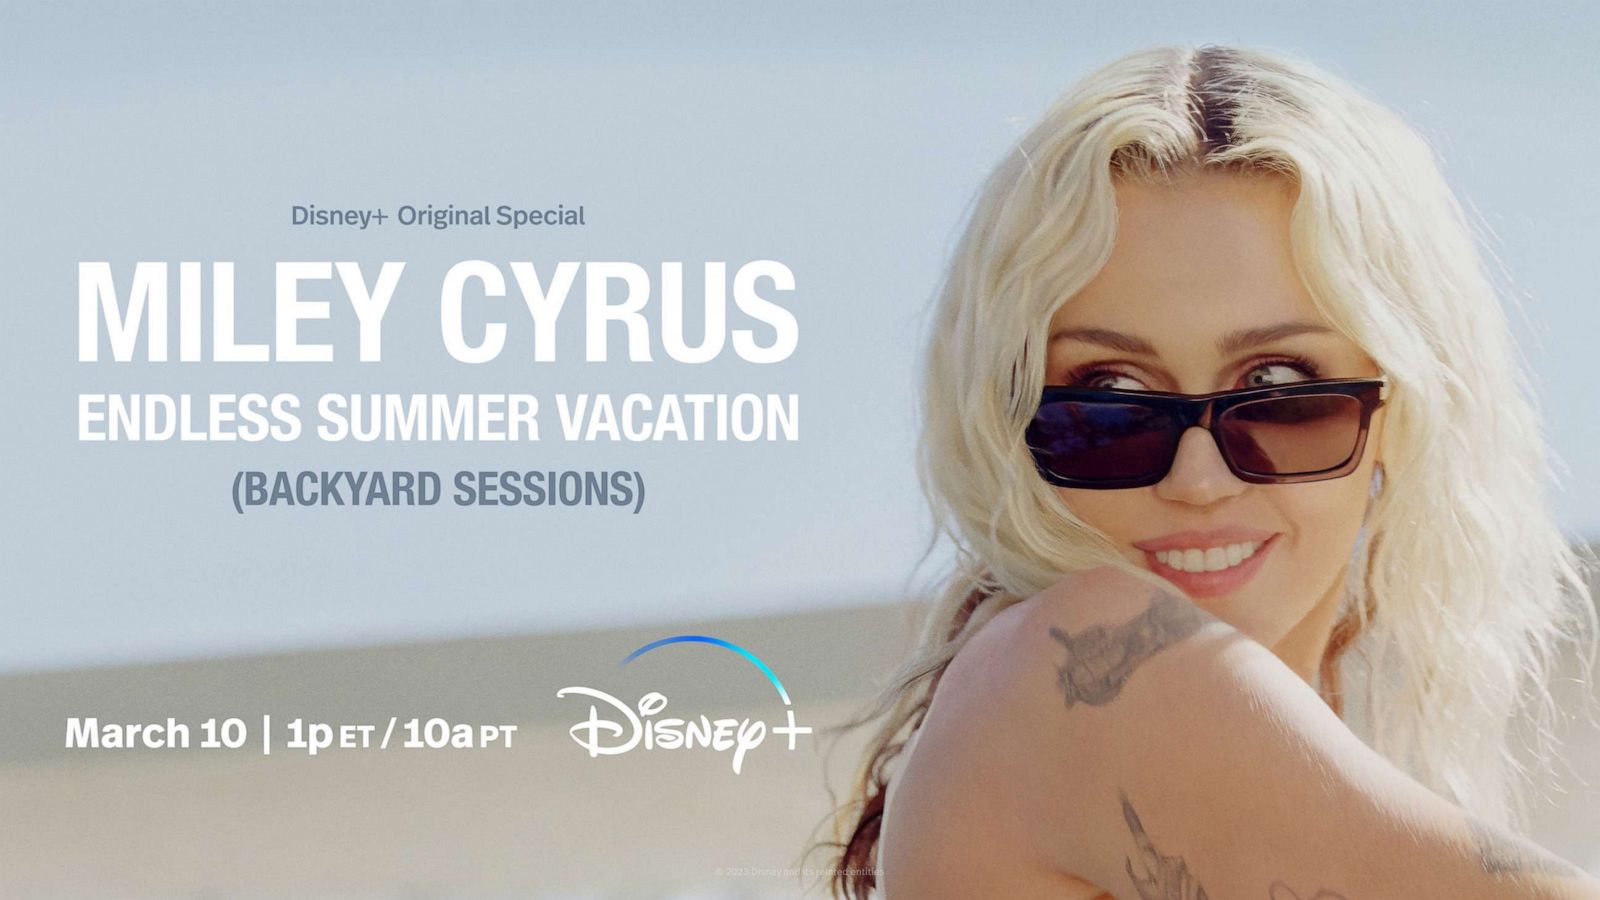 PHOTO: Miley Cyrus' backyard session coming to Disney+.